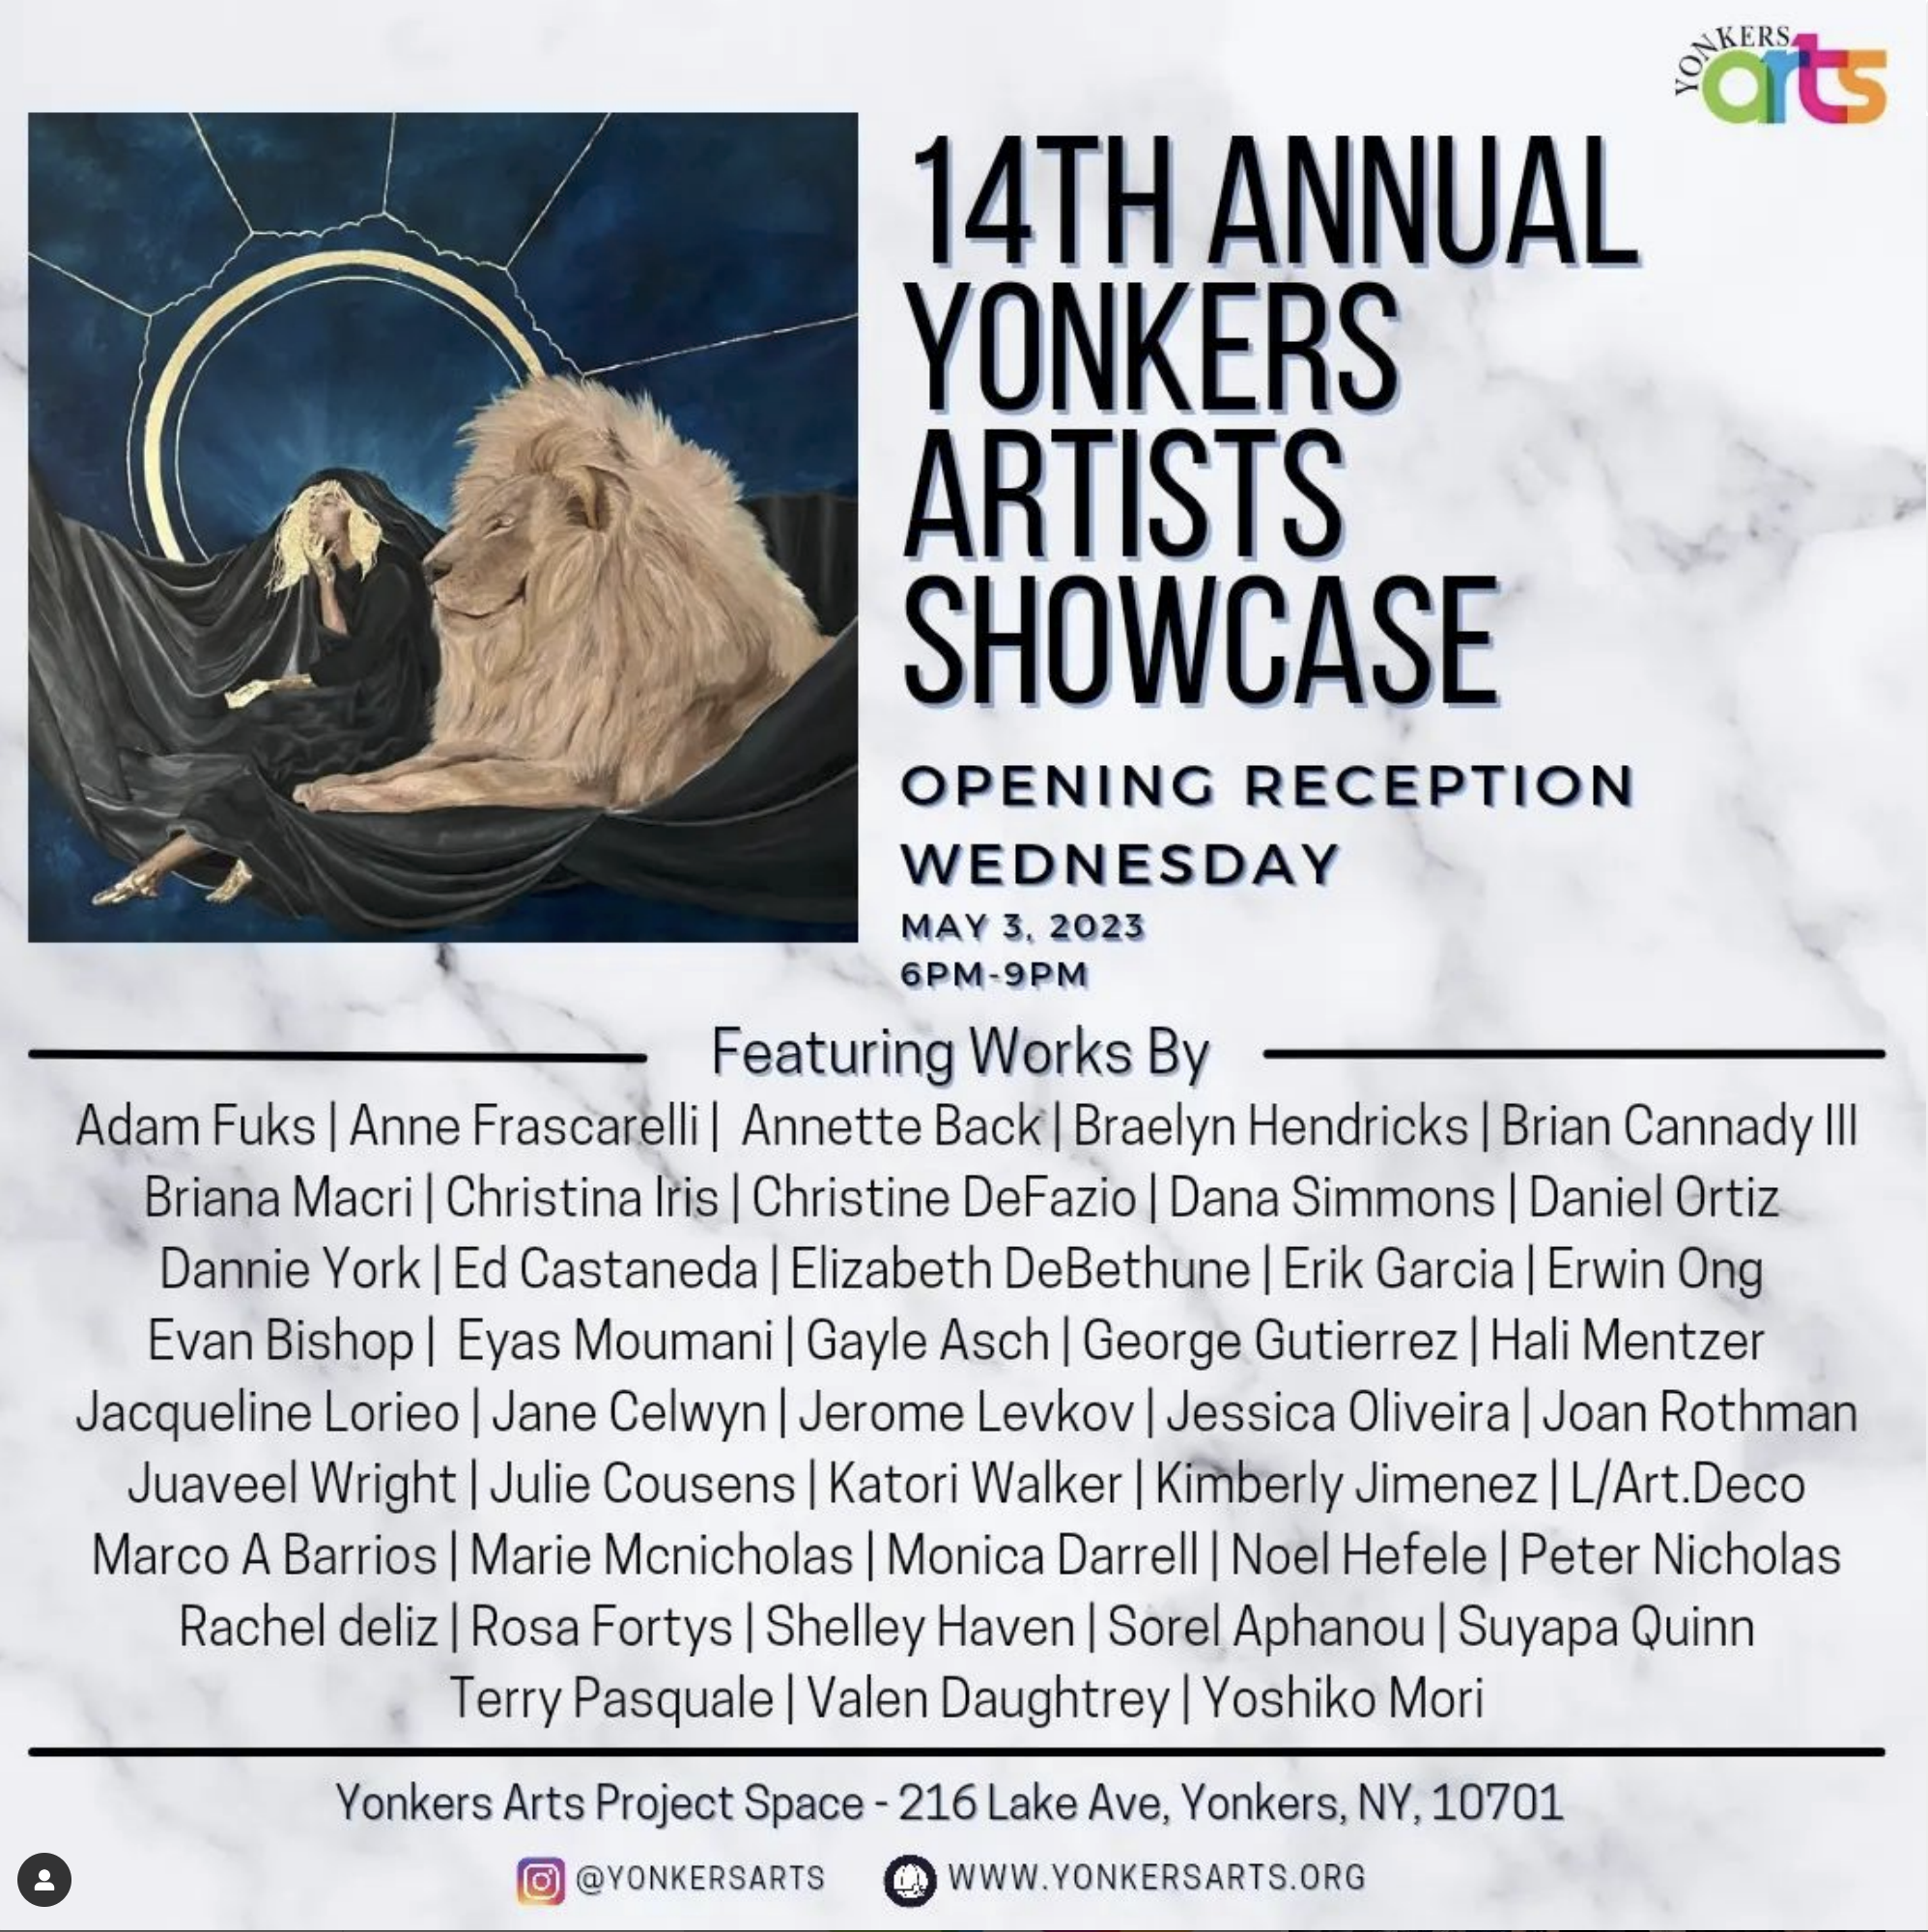 14th Annual Yonkers Artists Showcase